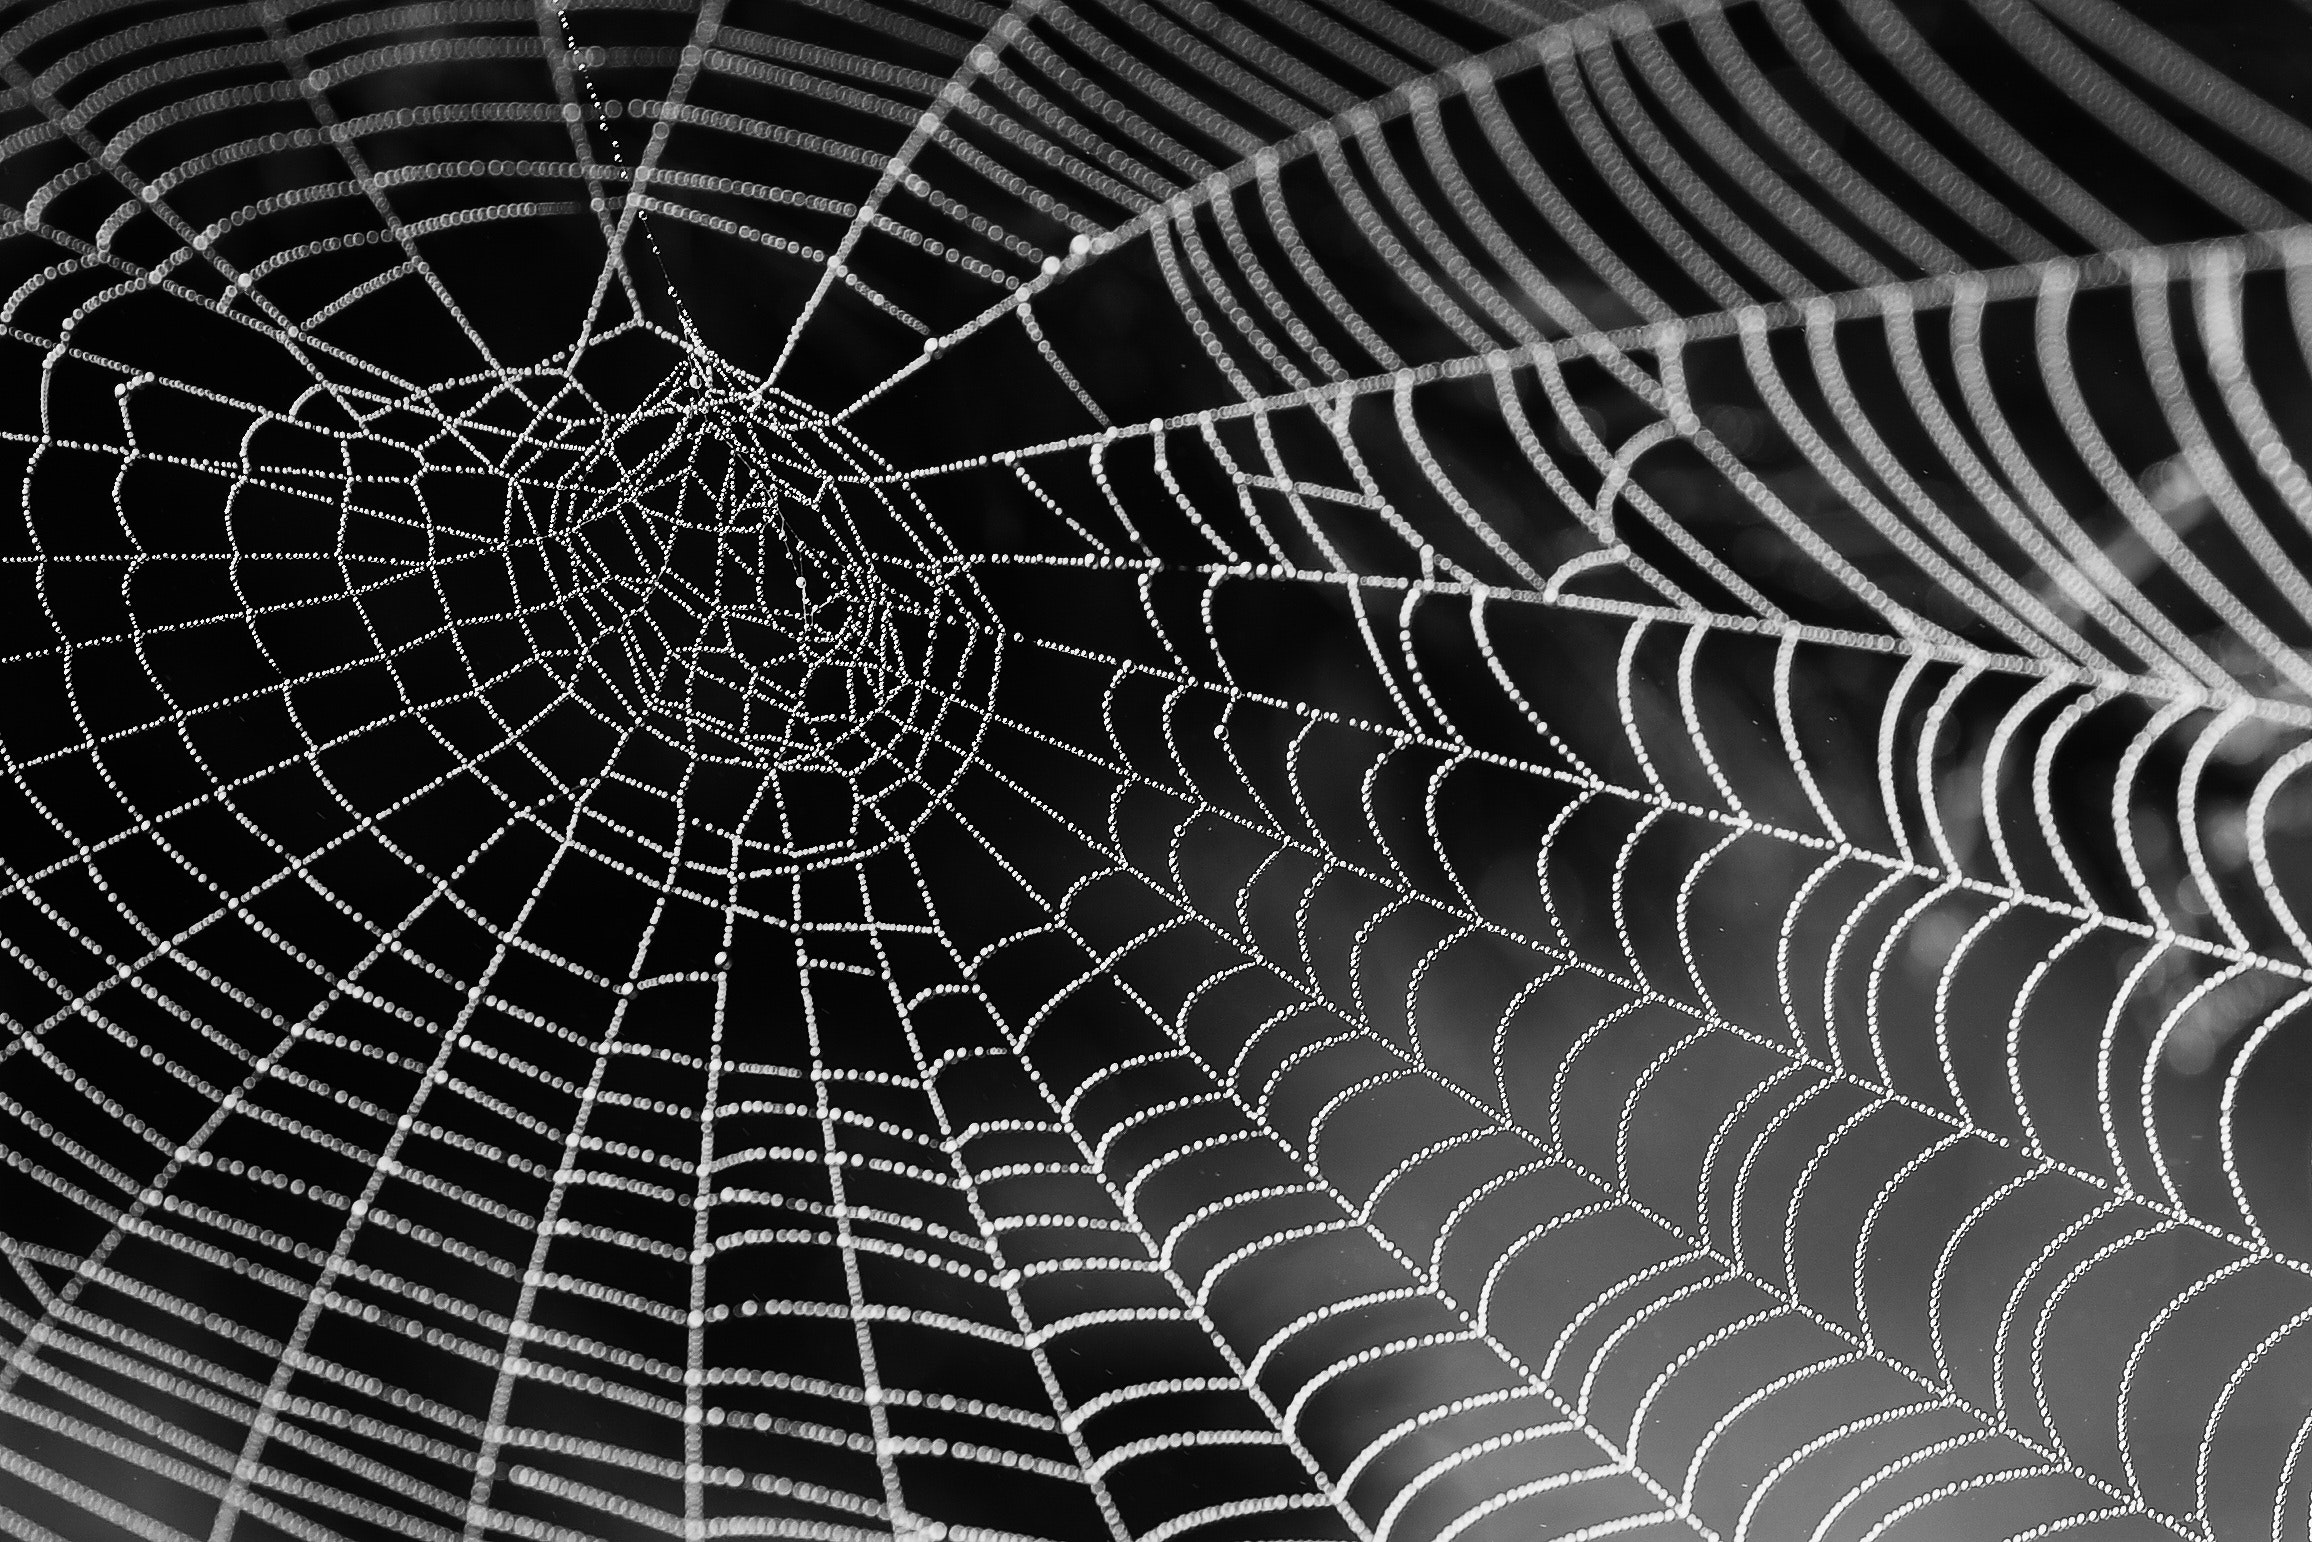 spider web networking with the world